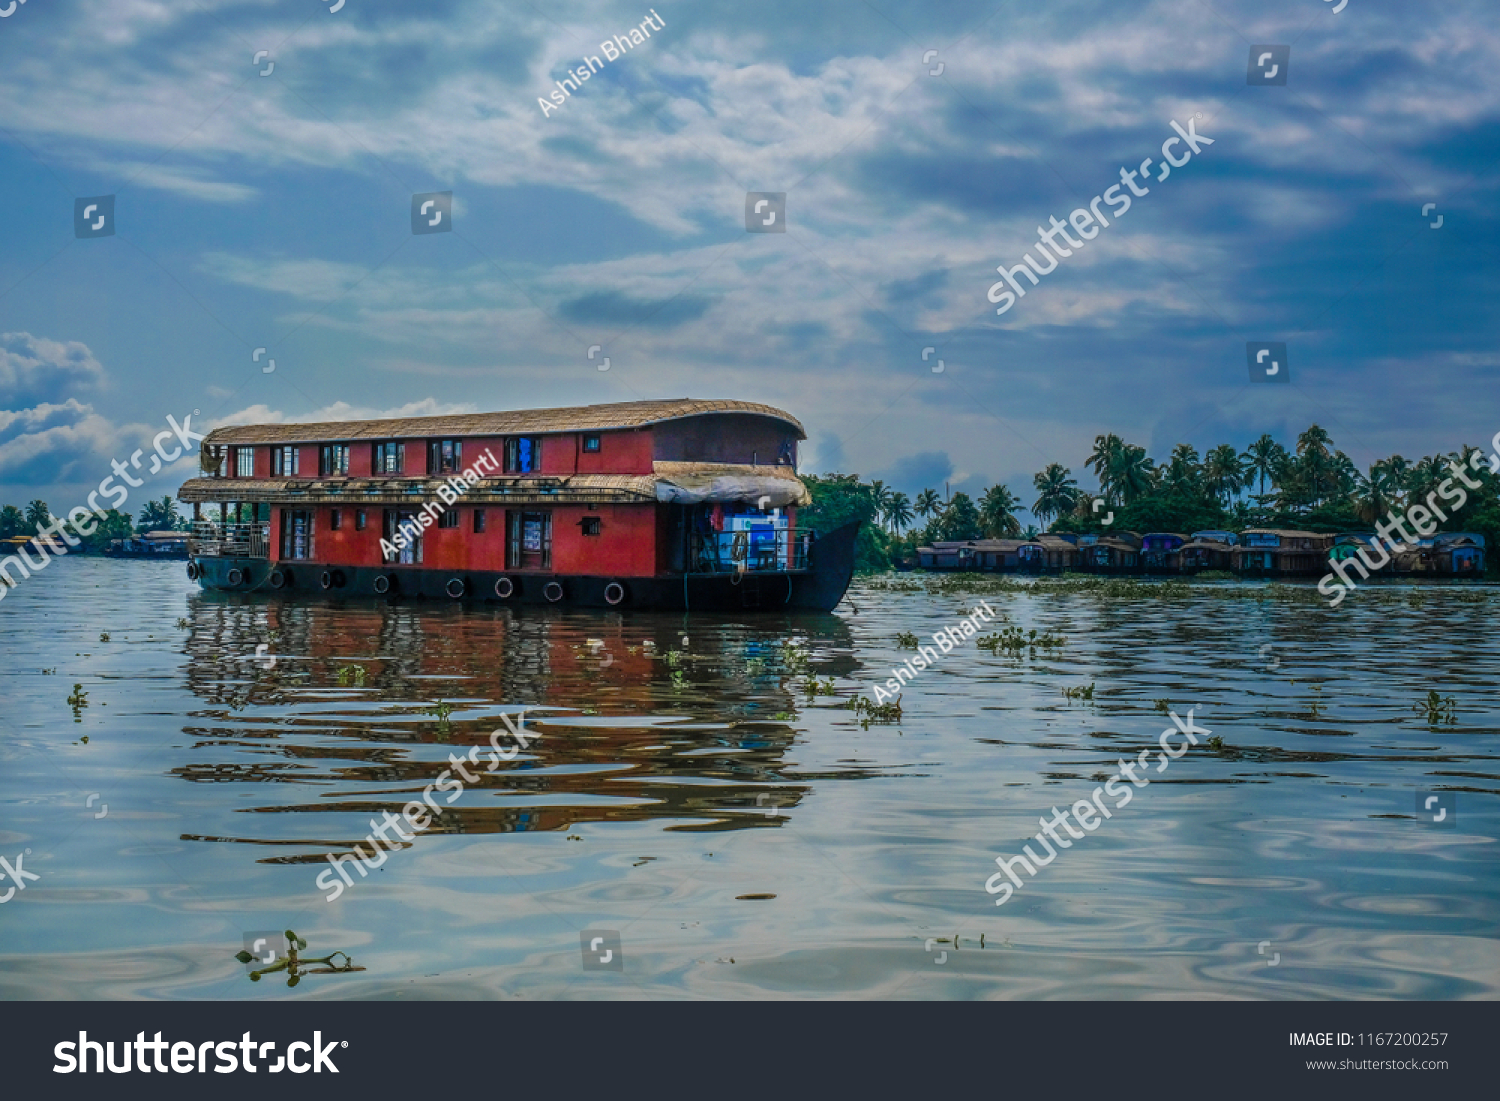 A boathouse in backwaters of Alleppey in Kerala, India with blue sky and clouds with reflection in water #1167200257